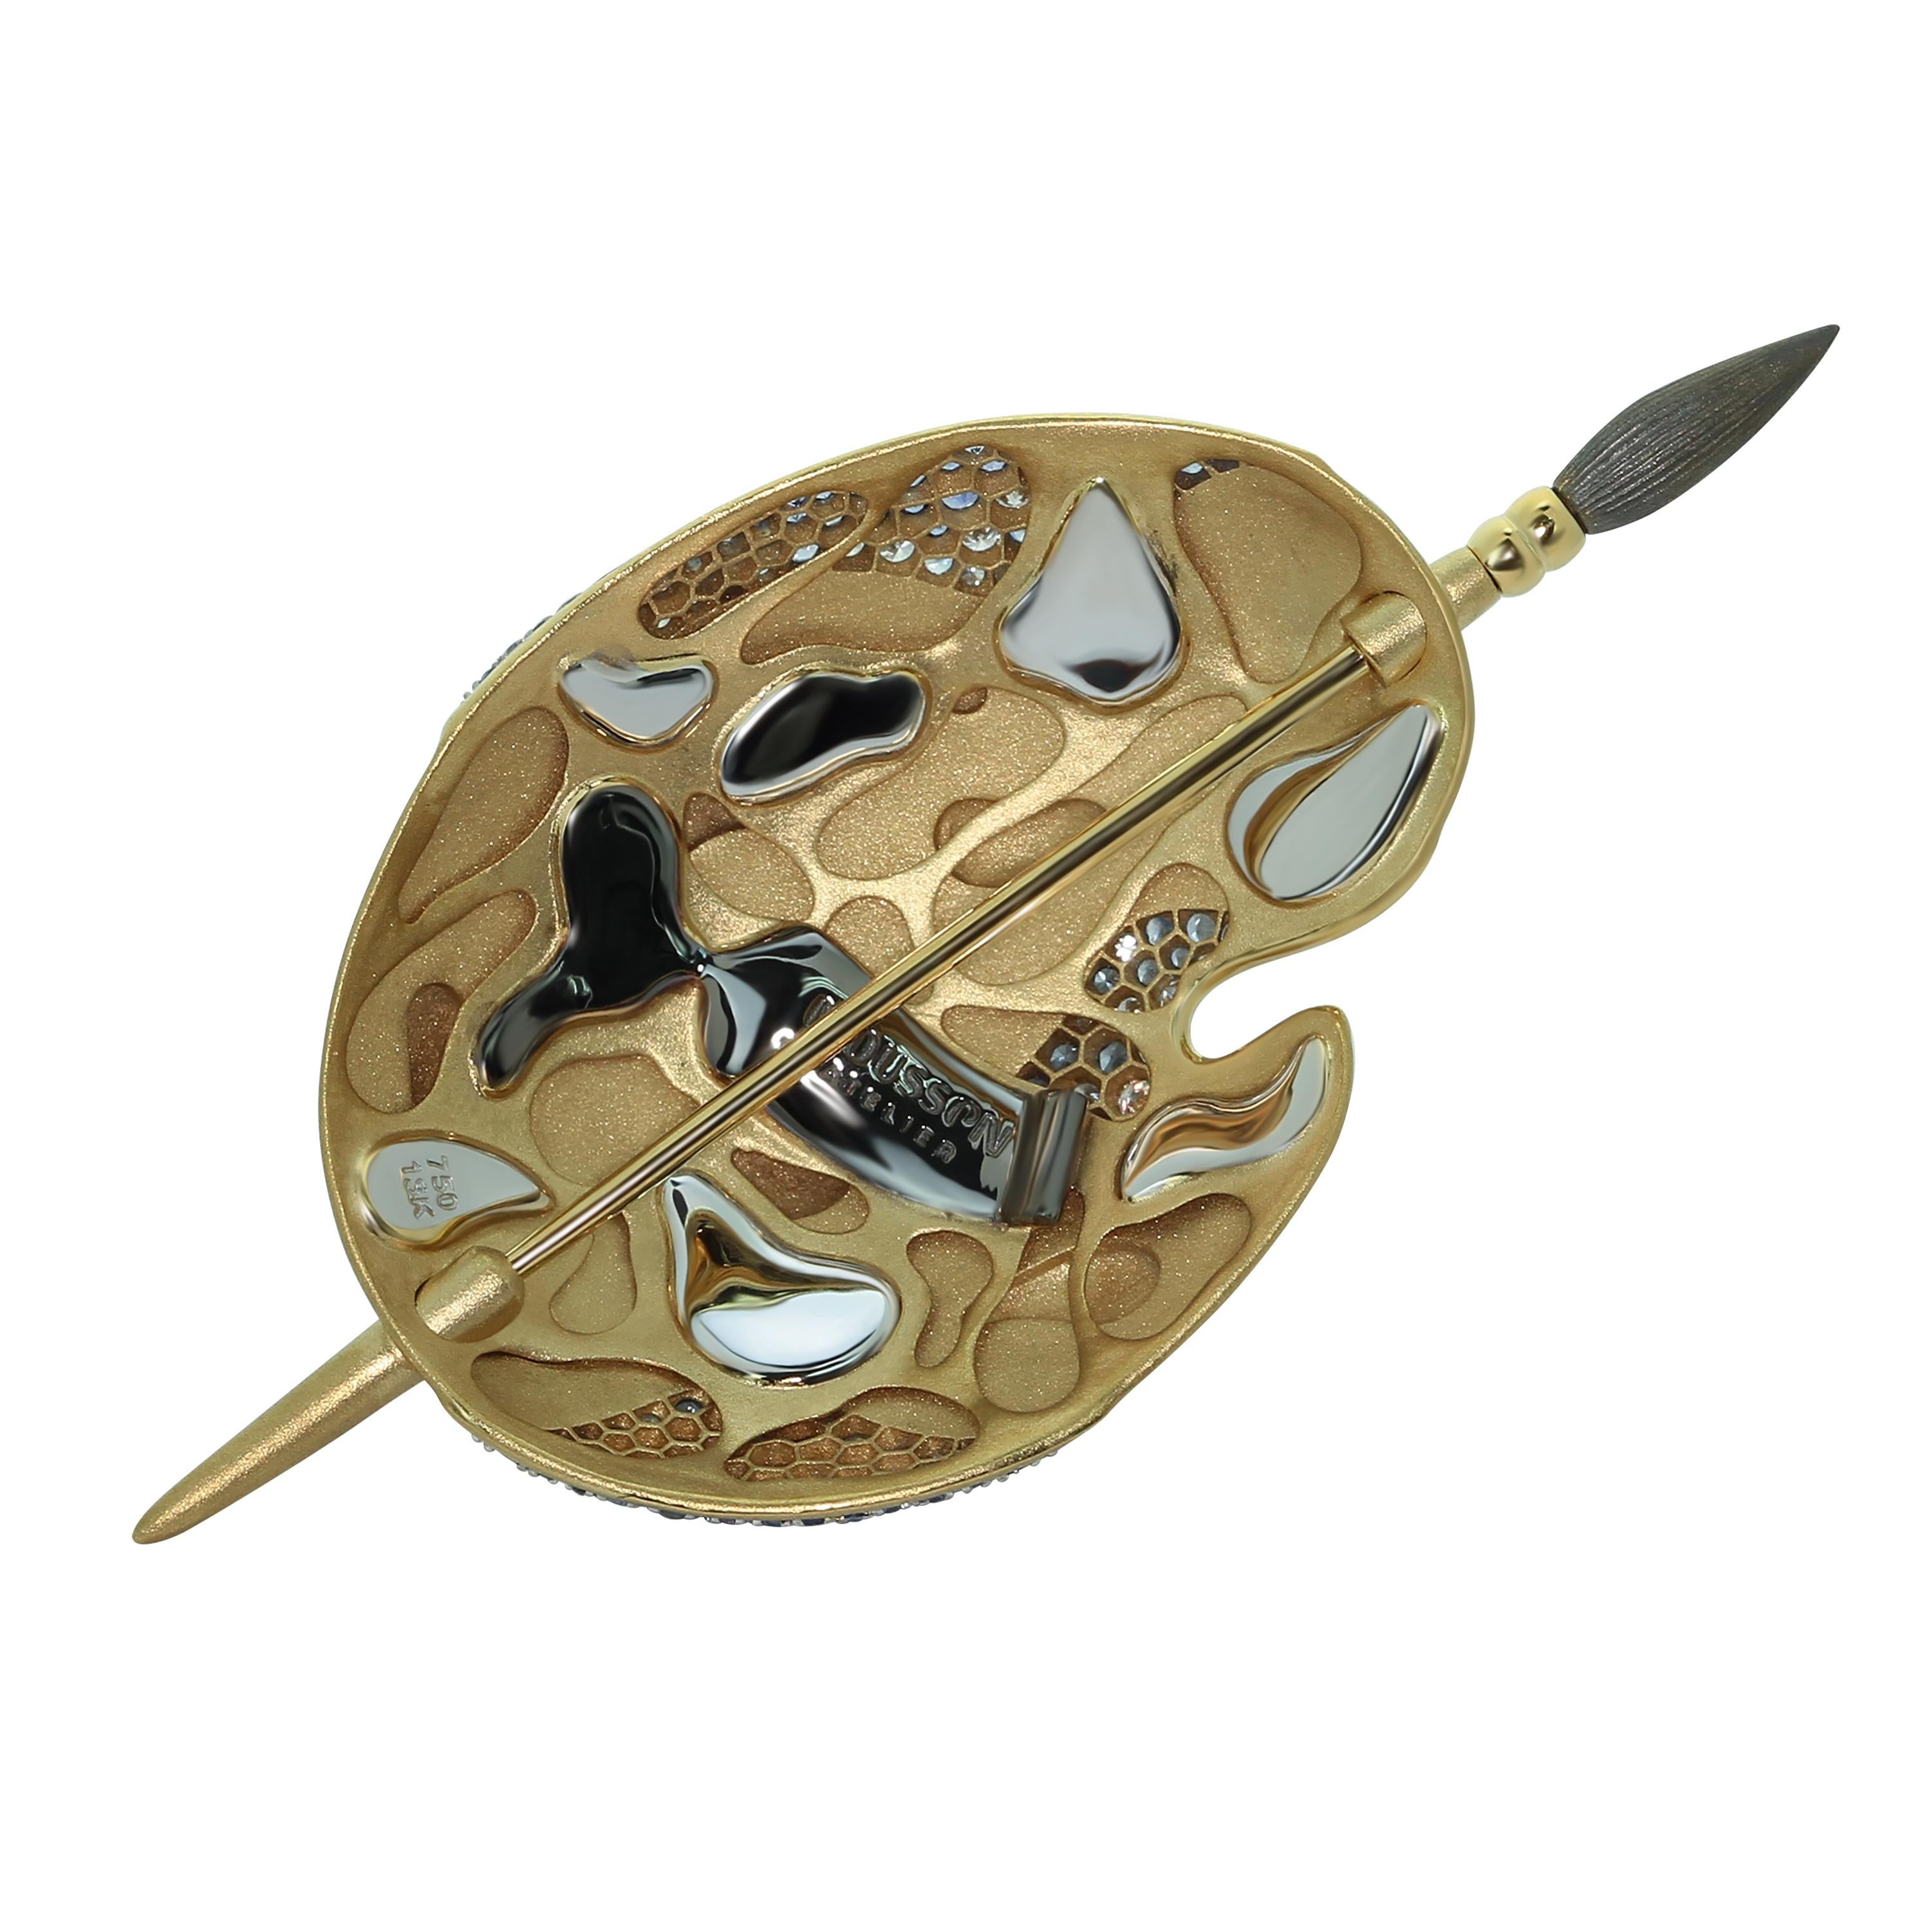 Diamond Sapphire Enamel 18 Karat Yellow Gold Palette and Brush Brooch
High detailed back part. Best present ever for some Artistic Person. 

Accompanied with the ring LU116414785053 and earrings LU116414785073

Size 31.1x60x8.7 mm
Weight 12.97 gm